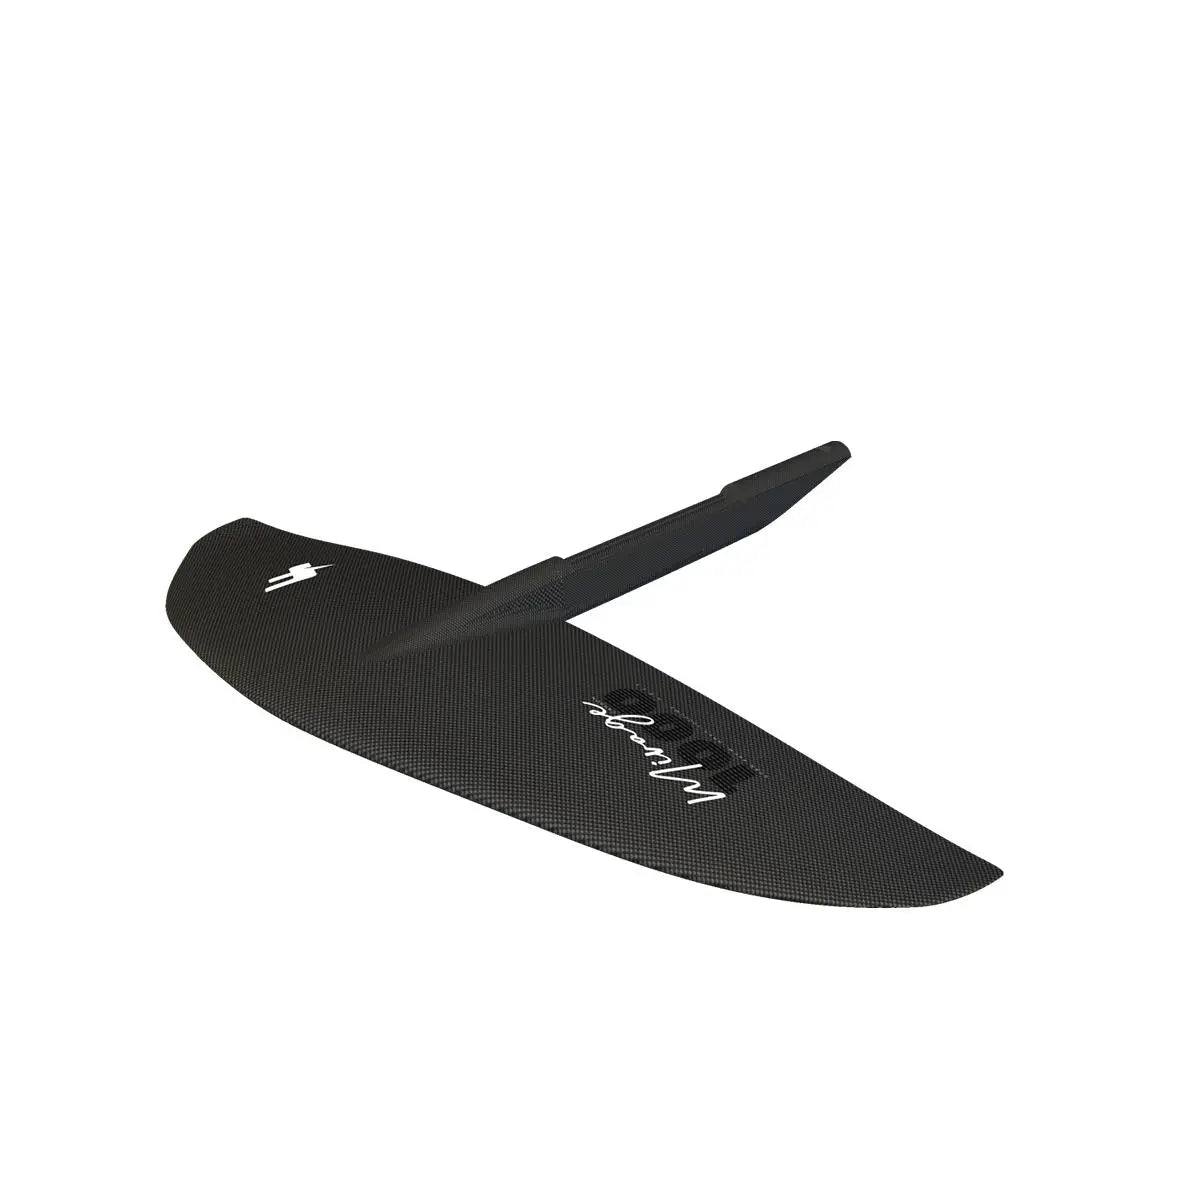 Mirage Carbon Front Wing